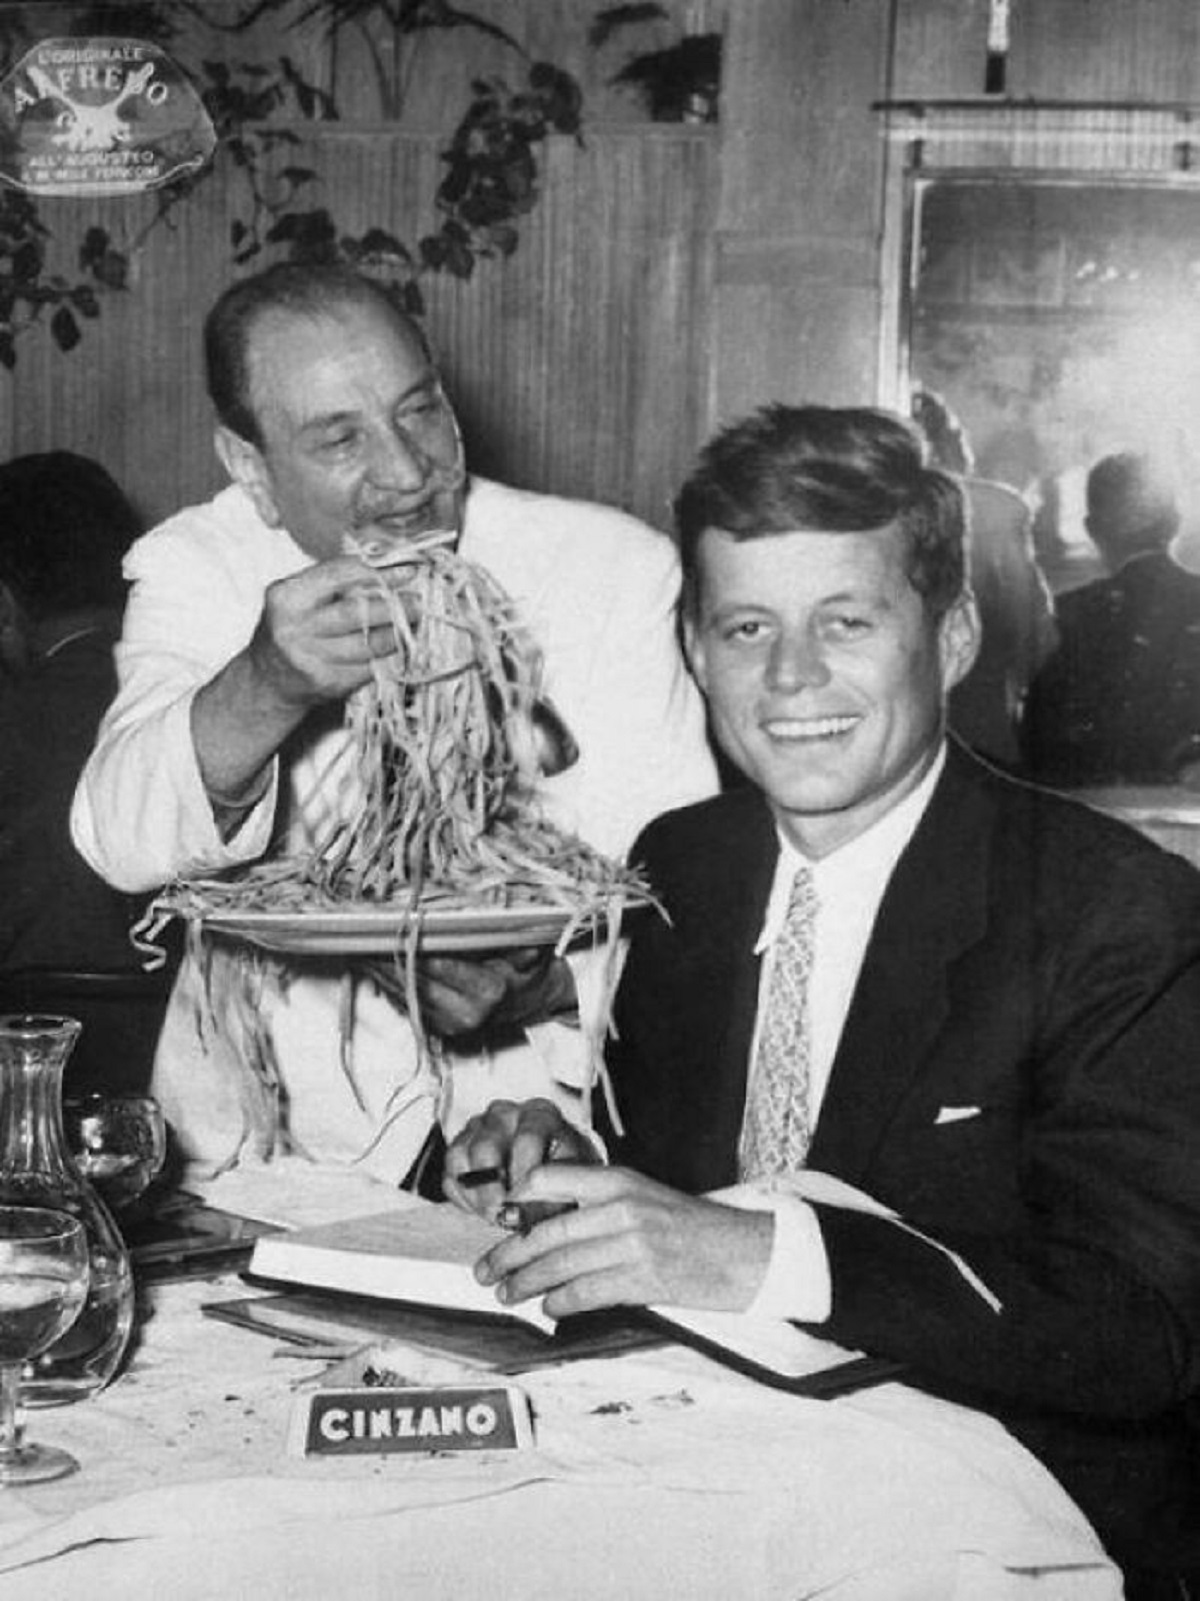 Jfk Being Served Fettuccine Alfredo By Its Inventor, Alfredo Di Lelio At The Restaurant Alfredo In Rome, Italy. 1963